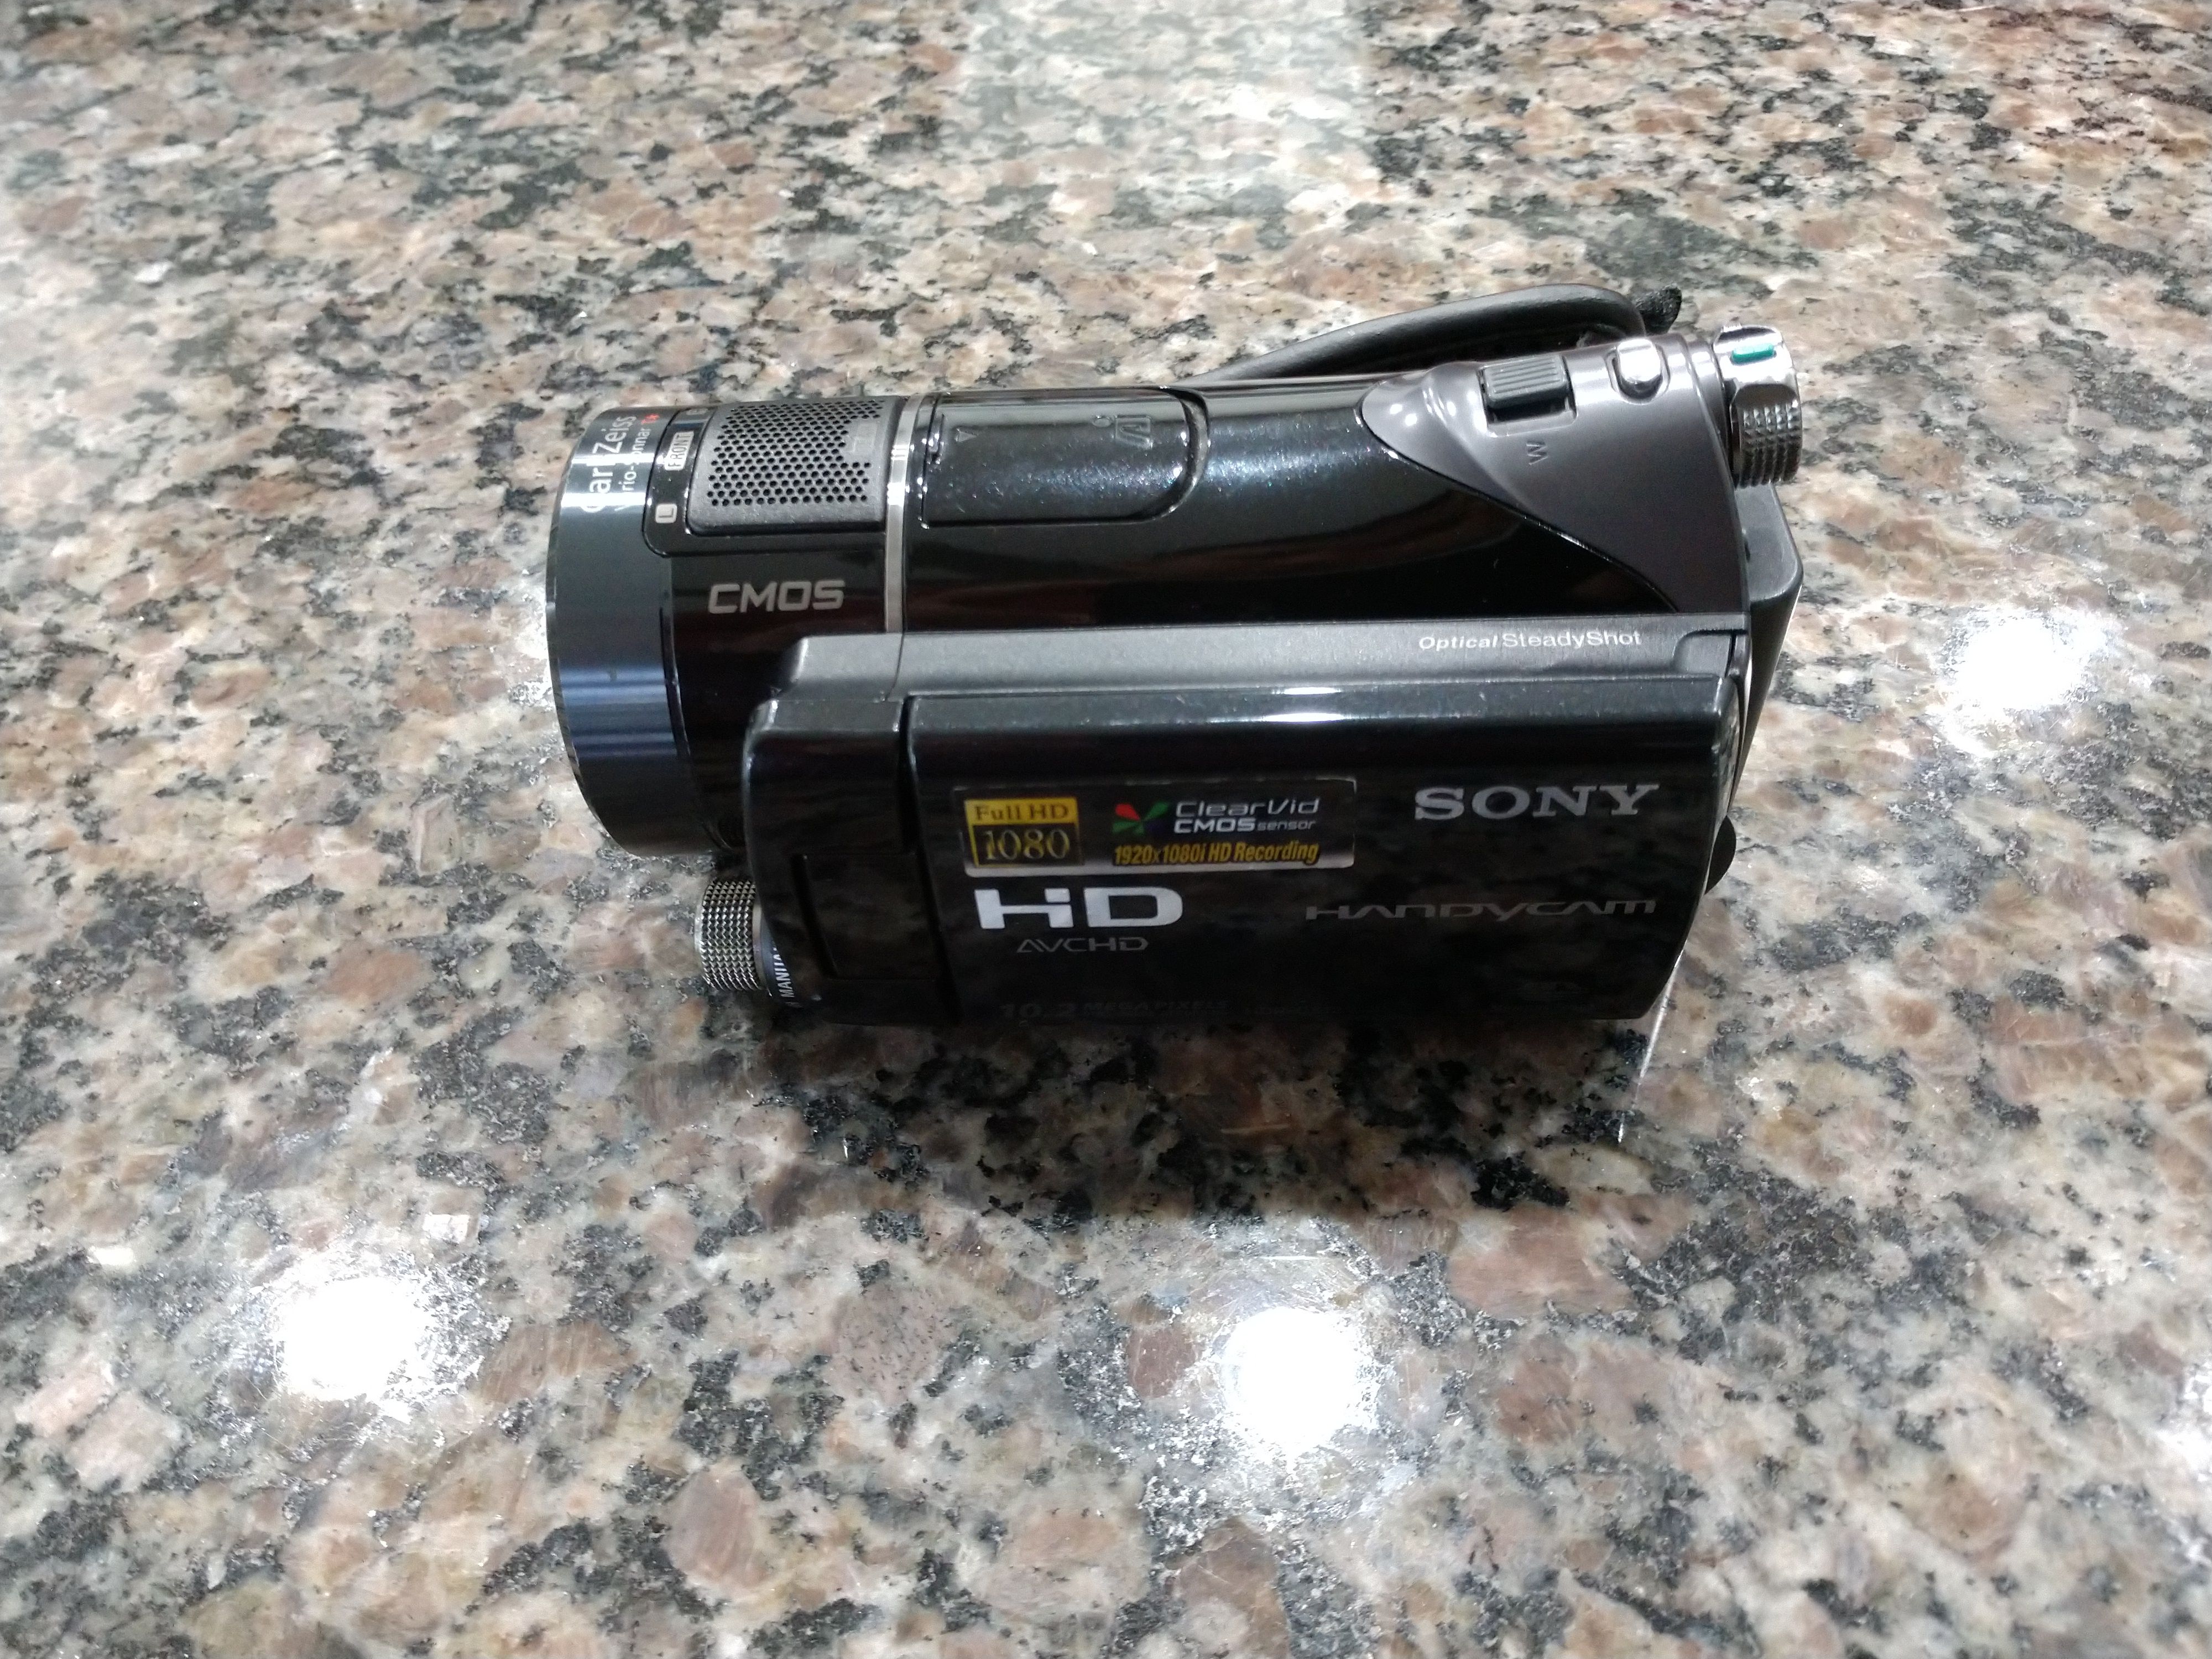 Sony HDR-CX12 High Definition Handycam Camcorder